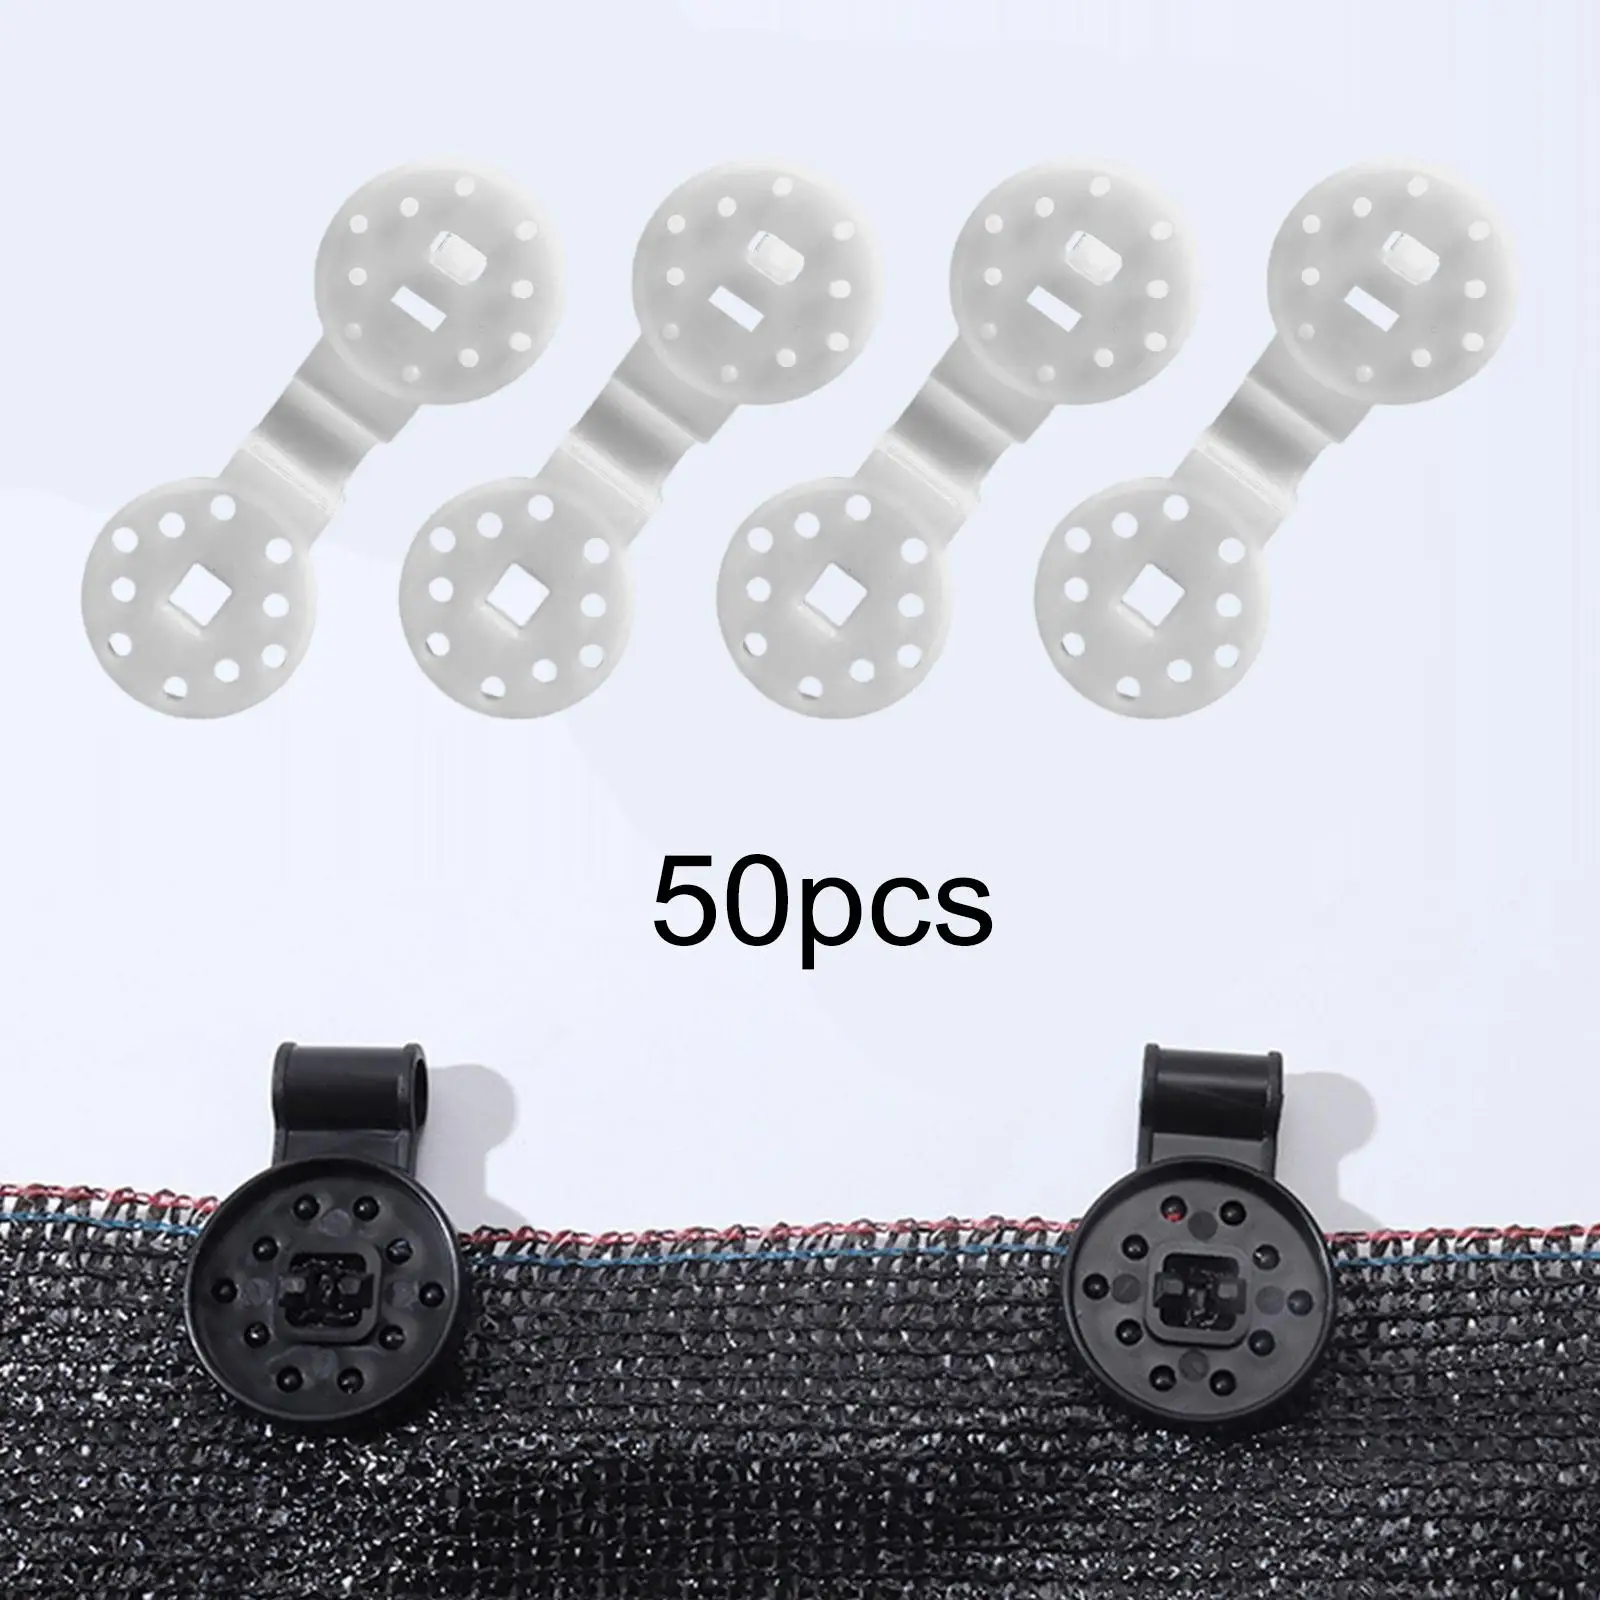 50Pcs Shade Hook Clips Garden Nets Agricultural Net Patio Shade Cloth Clips Mesh Netting Windproof Awning Clamp Tarp Clips